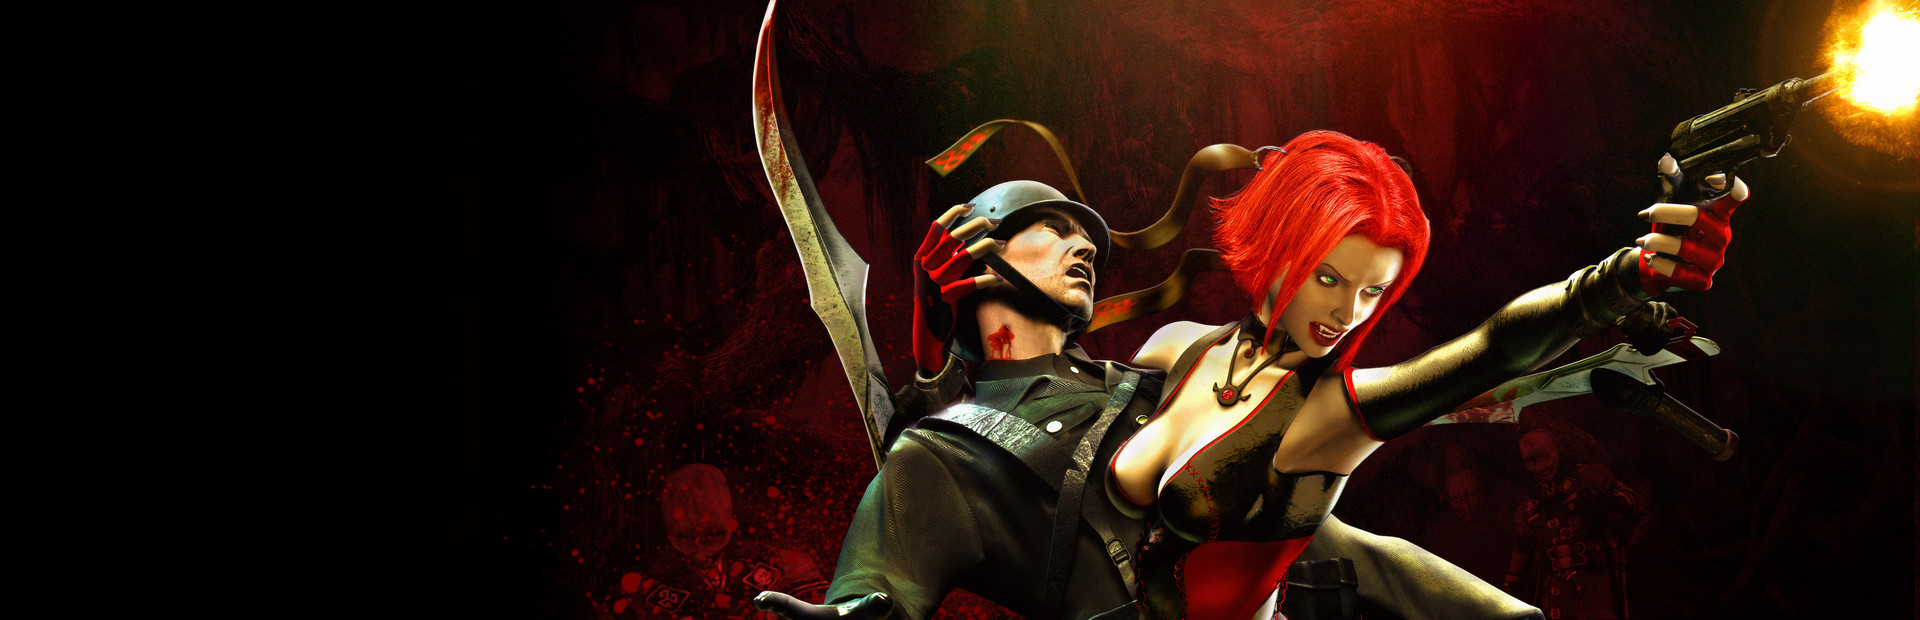 BloodRayne: Terminal Cut cover image